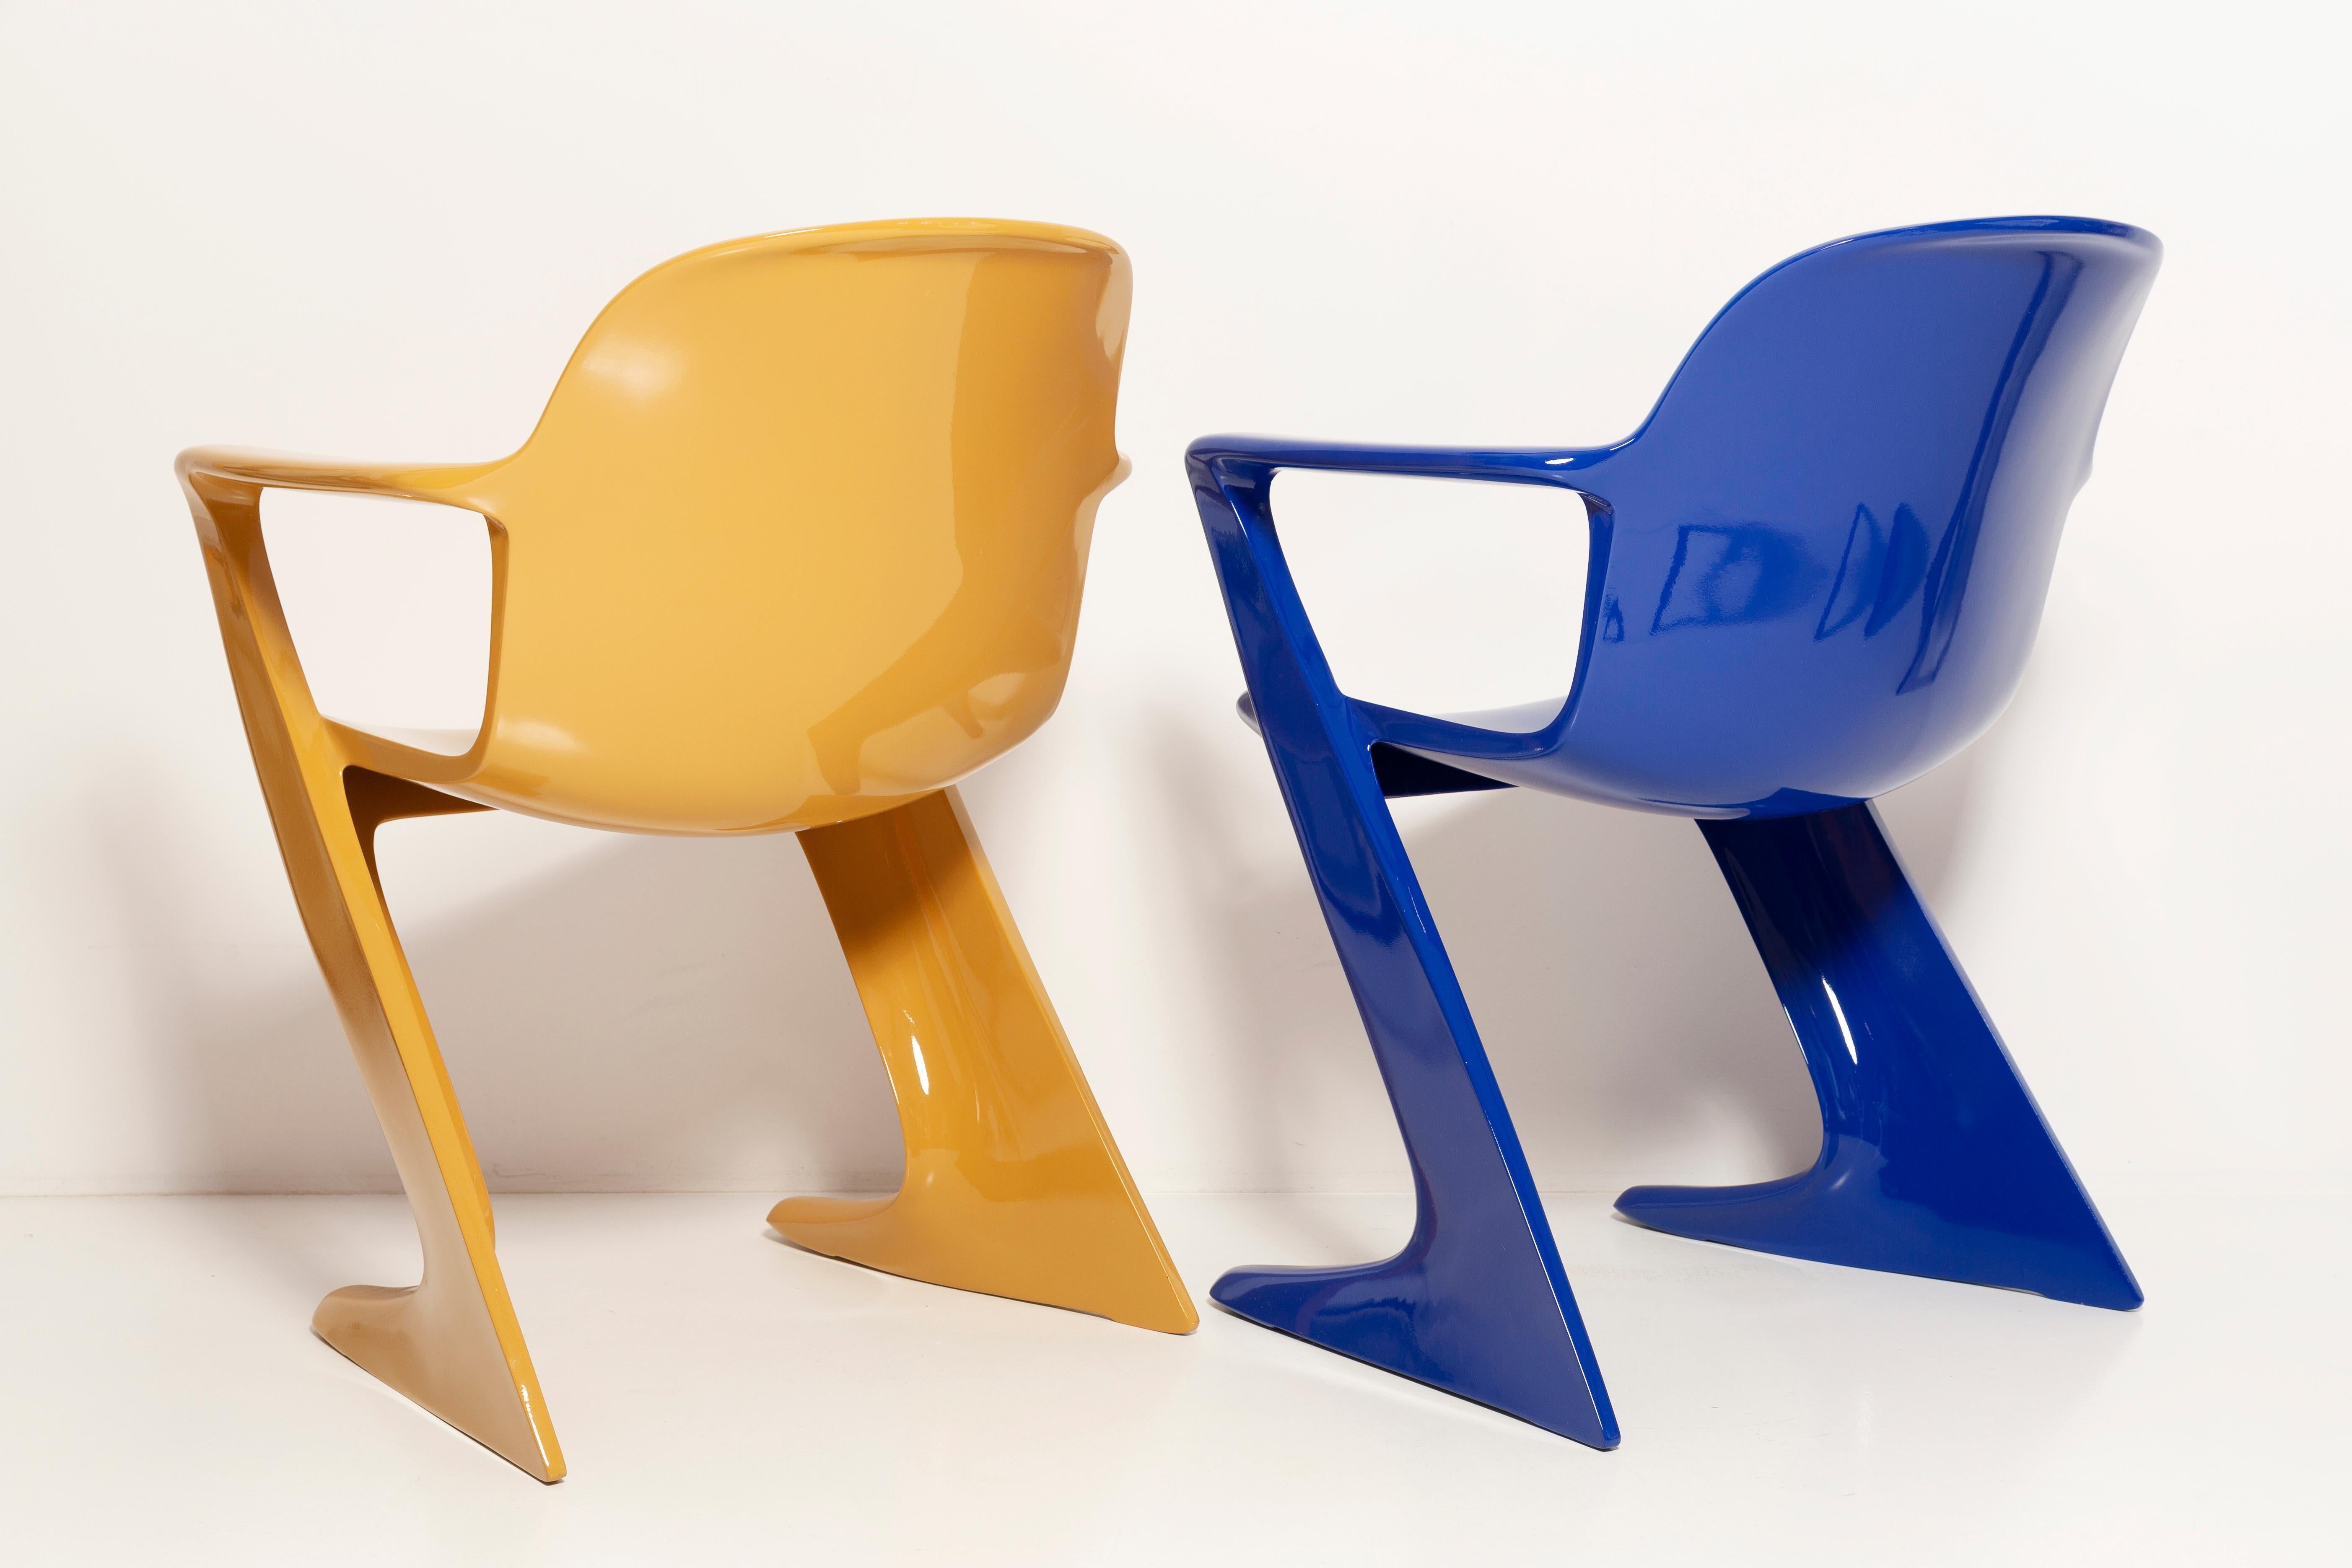 Two Mid-Century Mustard and Blue Kangaroo Chairs Ernst Moeckl, Germany, 1968 For Sale 3